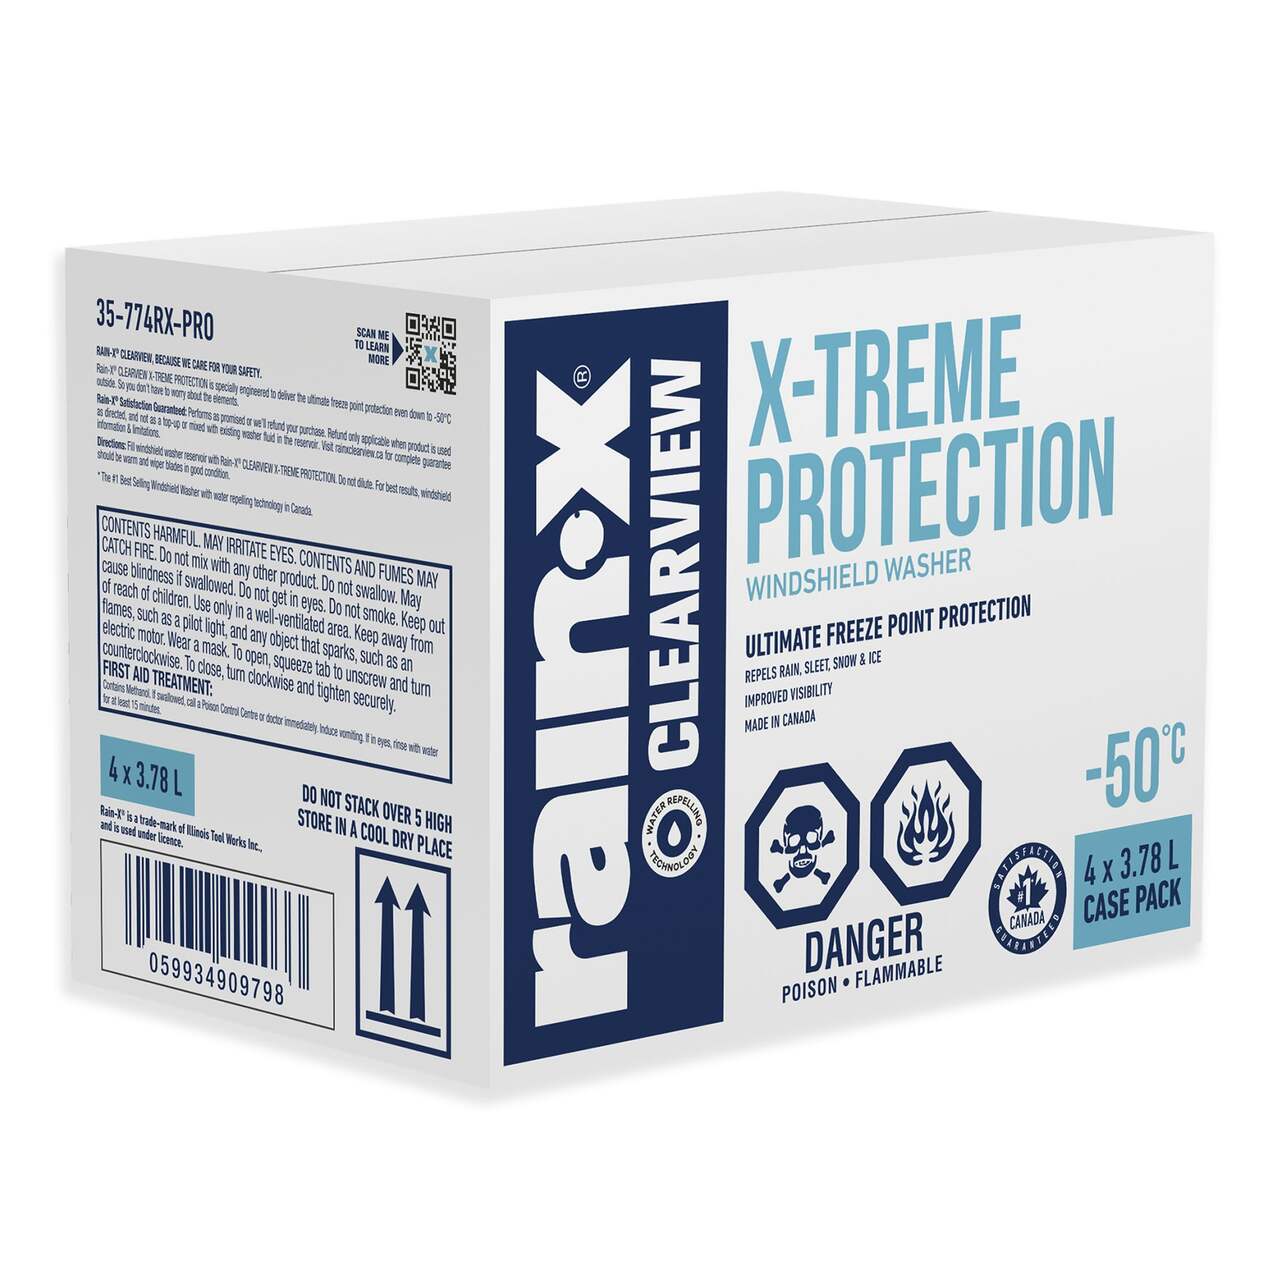 Rain-X ClearView - X-Treme Protection Windshield Washer Fluid, -50°C, 3.78  L x 4pk